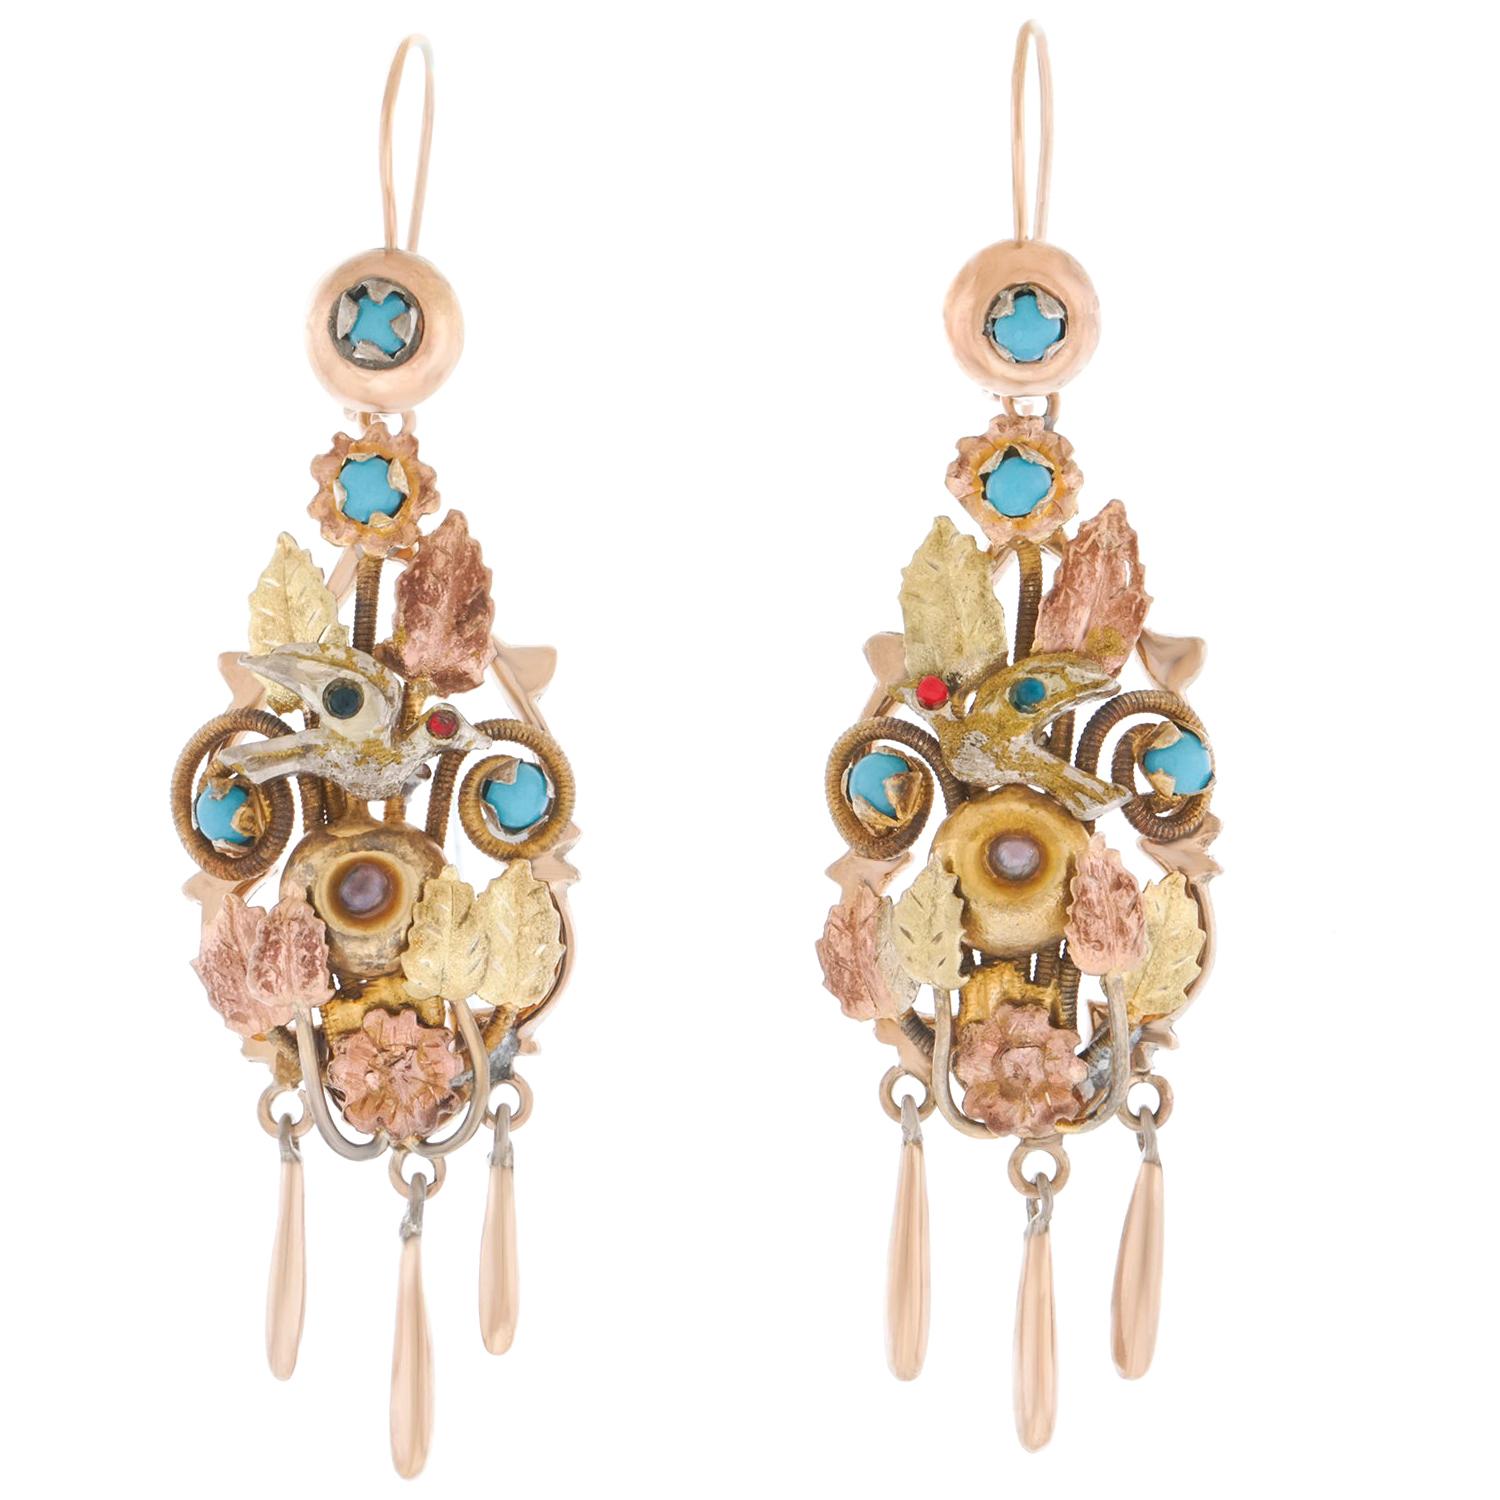 Circa 1890s, 14k,  Attributed Italy.   These elegantly insouciant Victorian earrings feature a riot of birds, leaves, flowers, and swirls set with colored stones and glass. Fashionably chic period Italian design, they pair effortlessly with a